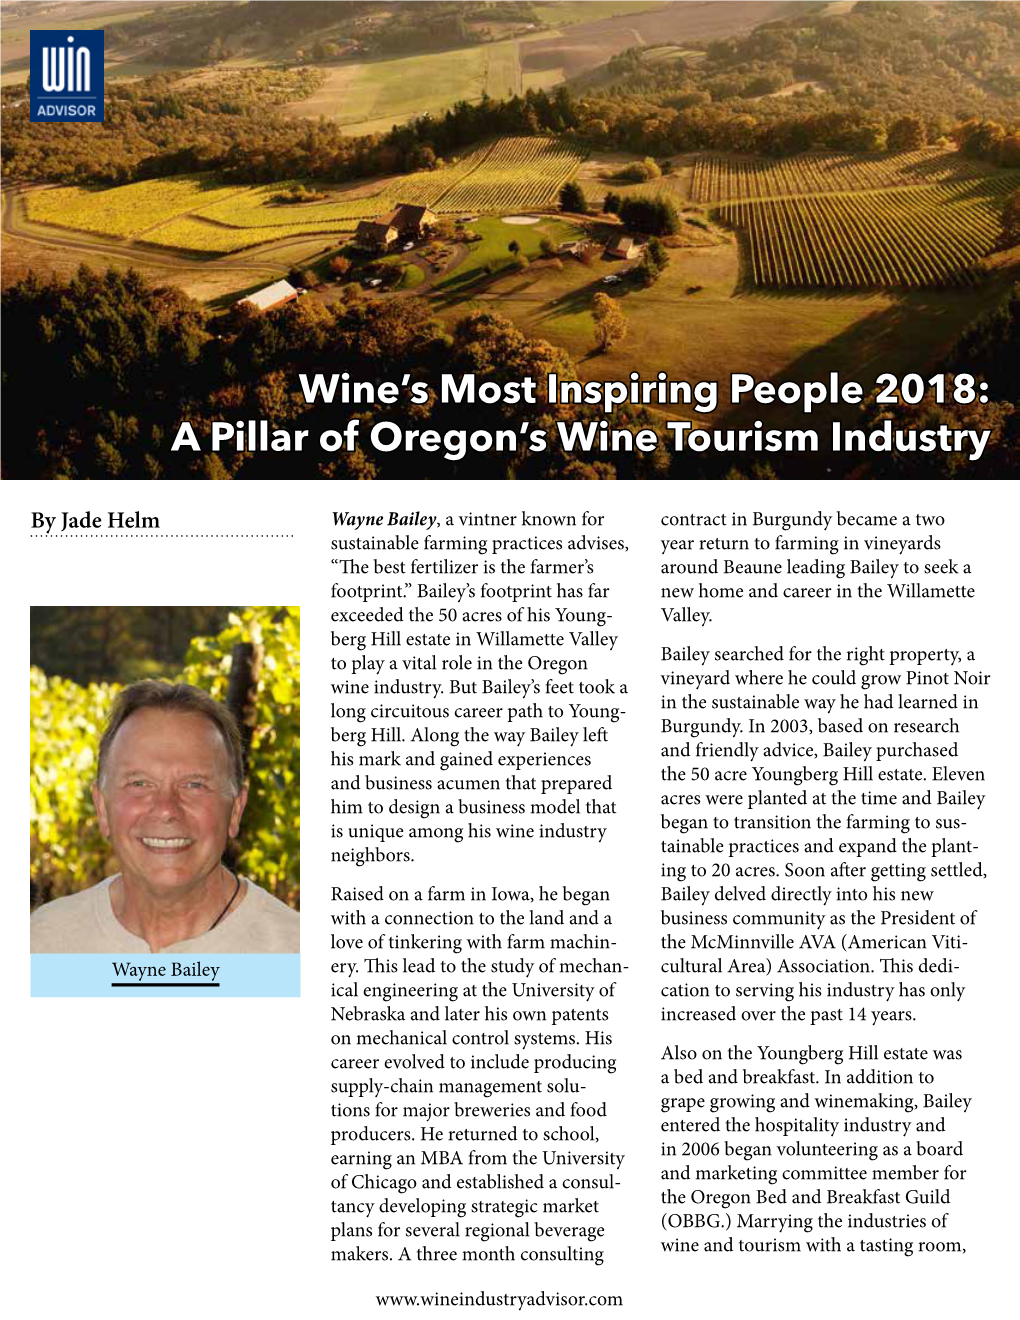 A Pillar of Oregon's Wine Tourism Industry